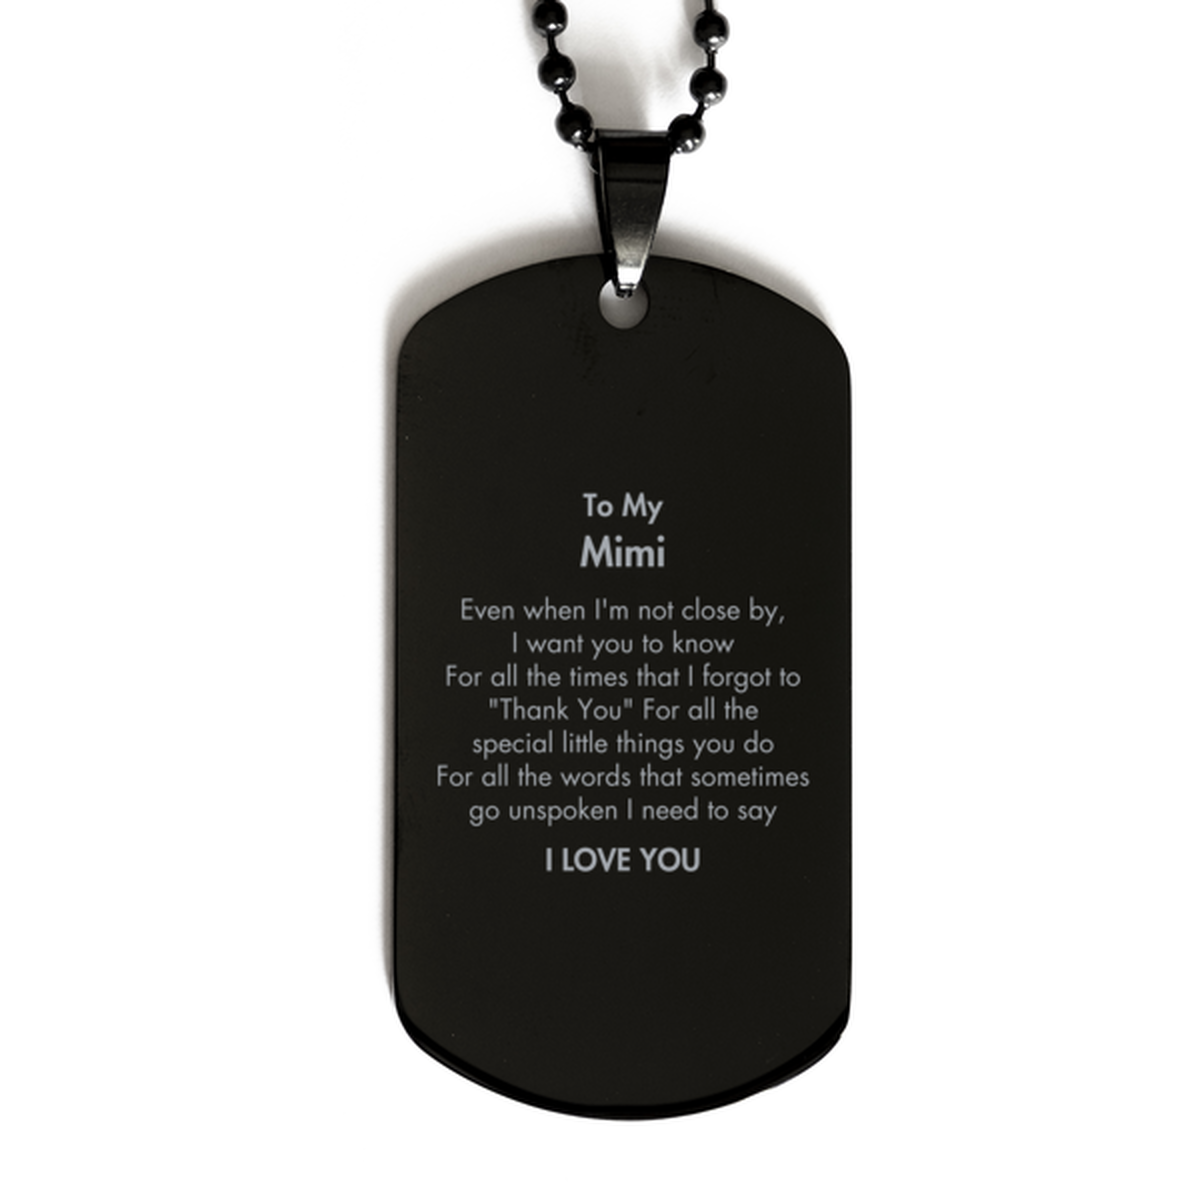 Thank You Gifts for Mimi, Keepsake Black Dog Tag Gifts for Mimi Birthday Mother's day Father's Day Mimi For all the words That sometimes go unspoken I need to say I LOVE YOU